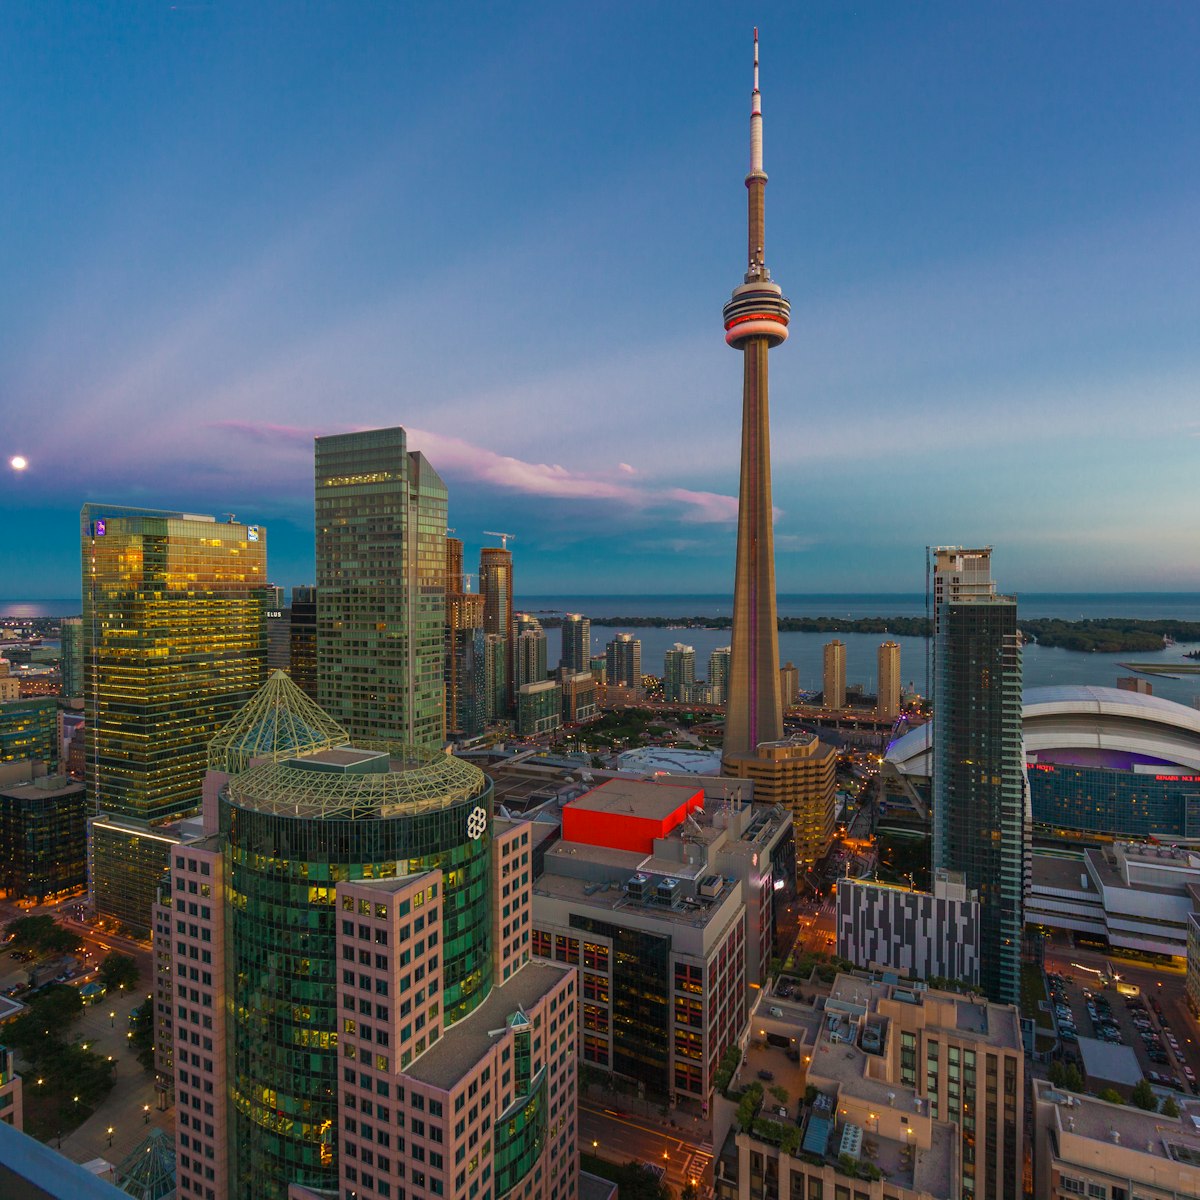 Toronto Cityscape with CN Tower and view of Lake Ontario
465466108
Lake Ontario, Skydome, CN Tower, Night, Moon, Cityscape, night photography, Downtown Toronto